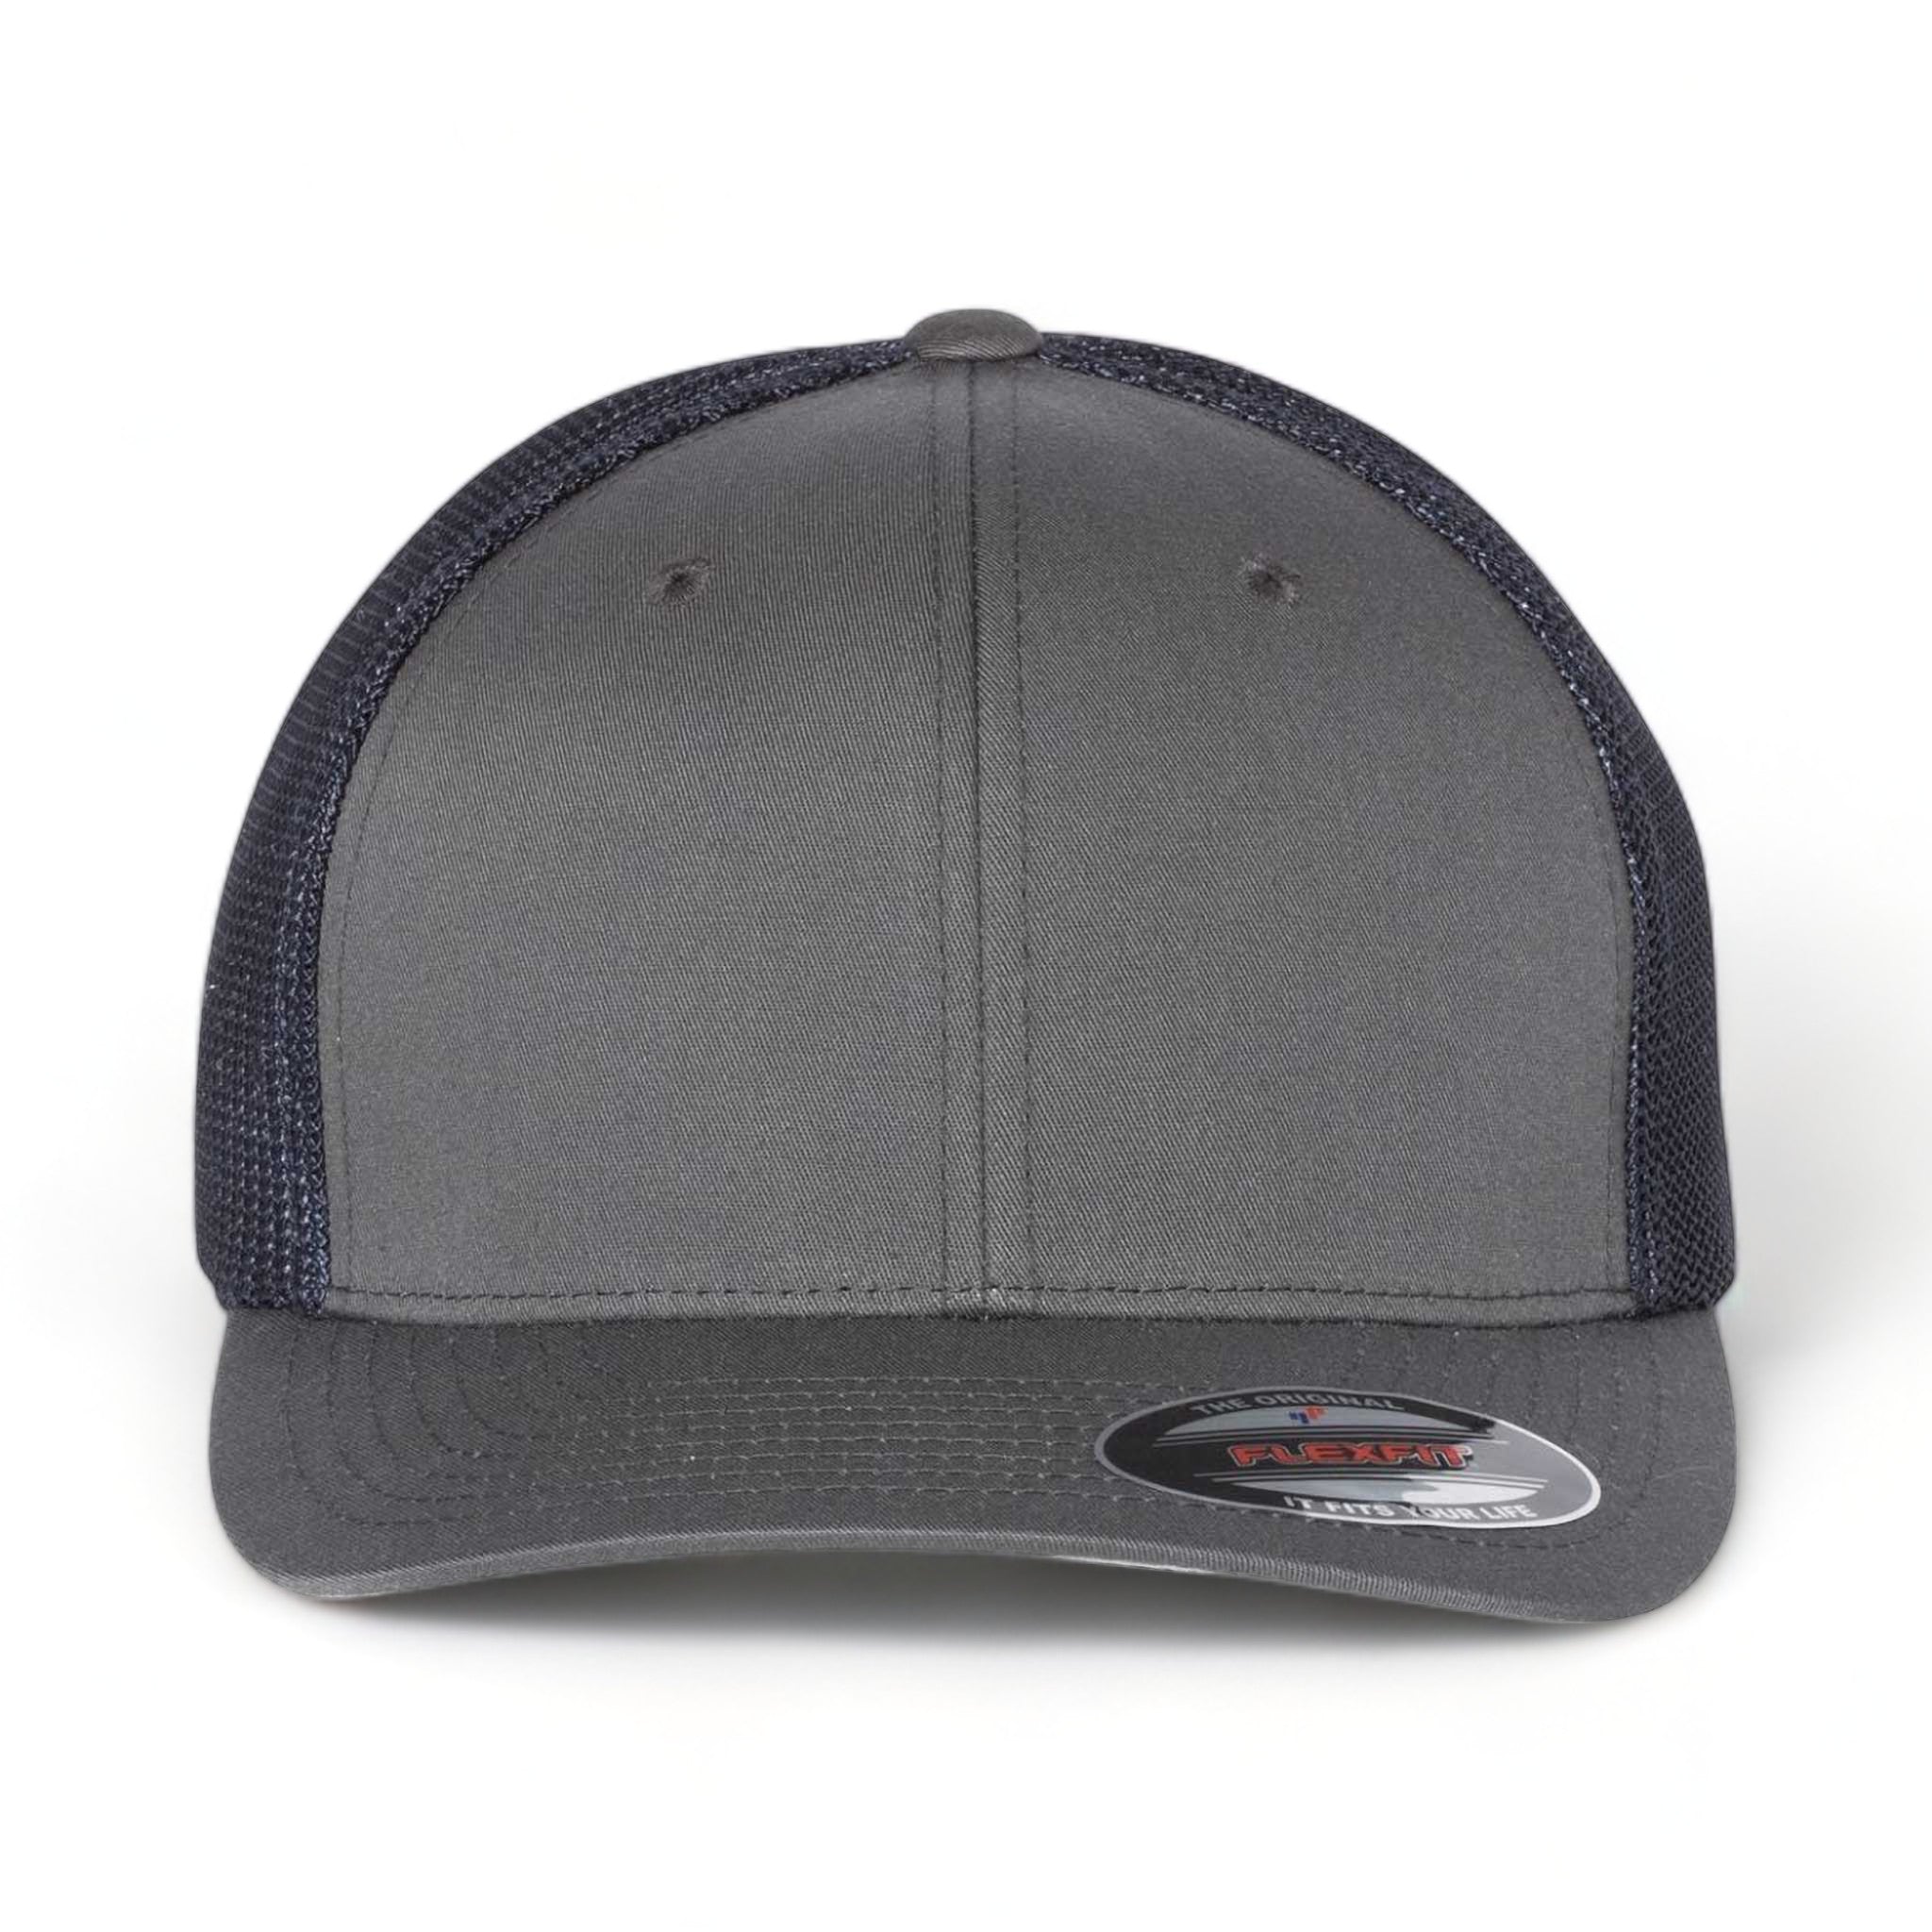 Front view of Flexfit 6511 custom hat in charcoal and navy